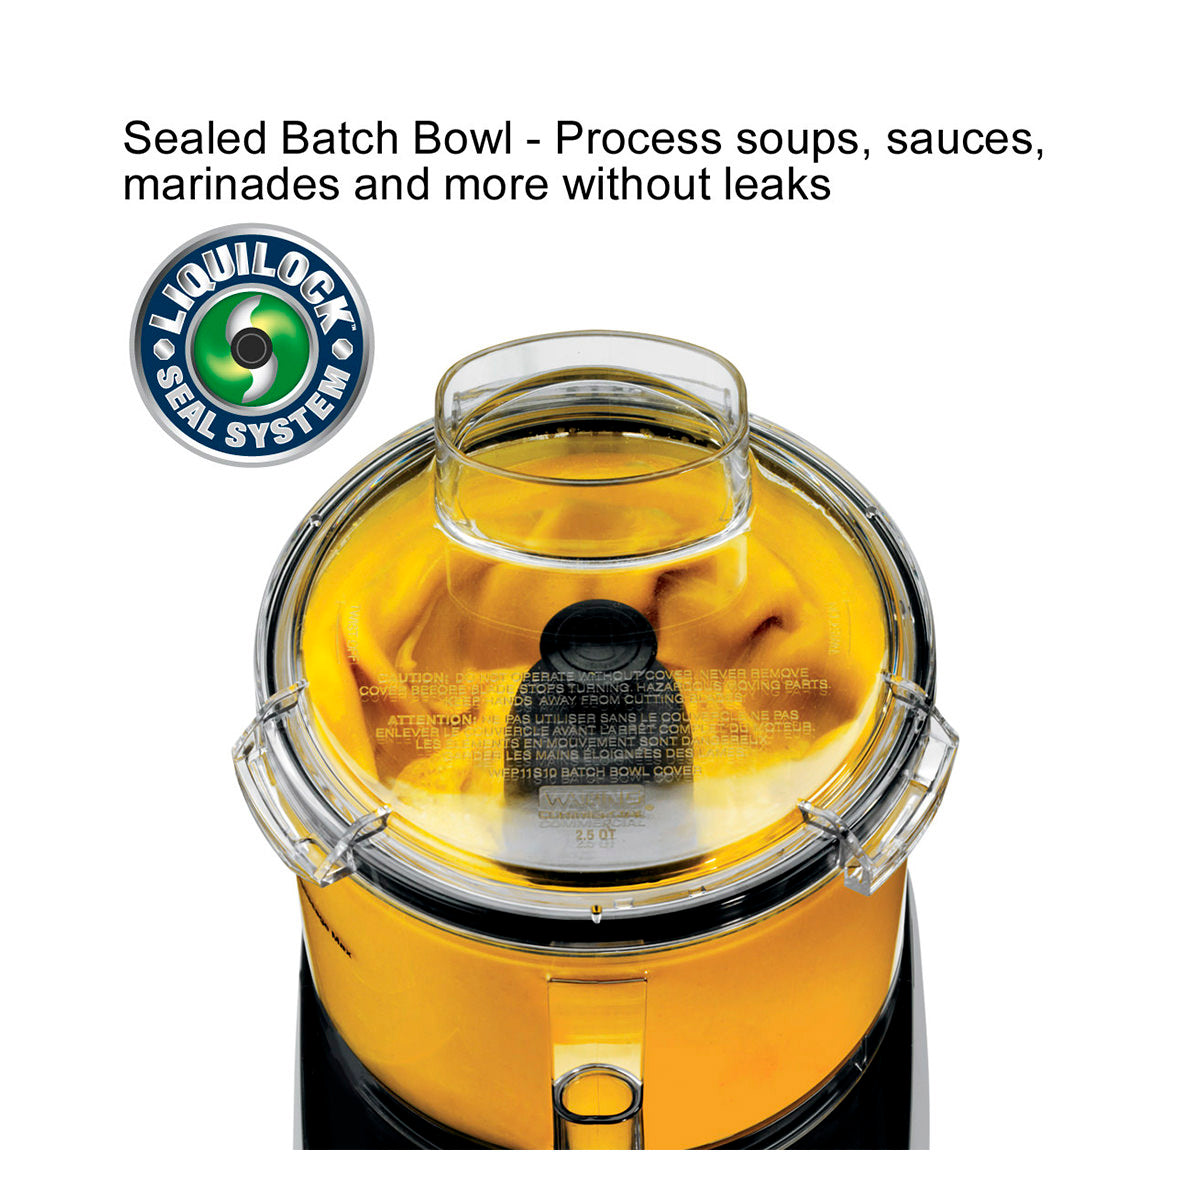 WFP14SW - 3.5-Qt. Bowl Cutter Mixer with Flat Lid and LiquiLock Seal System by Waring Commercial